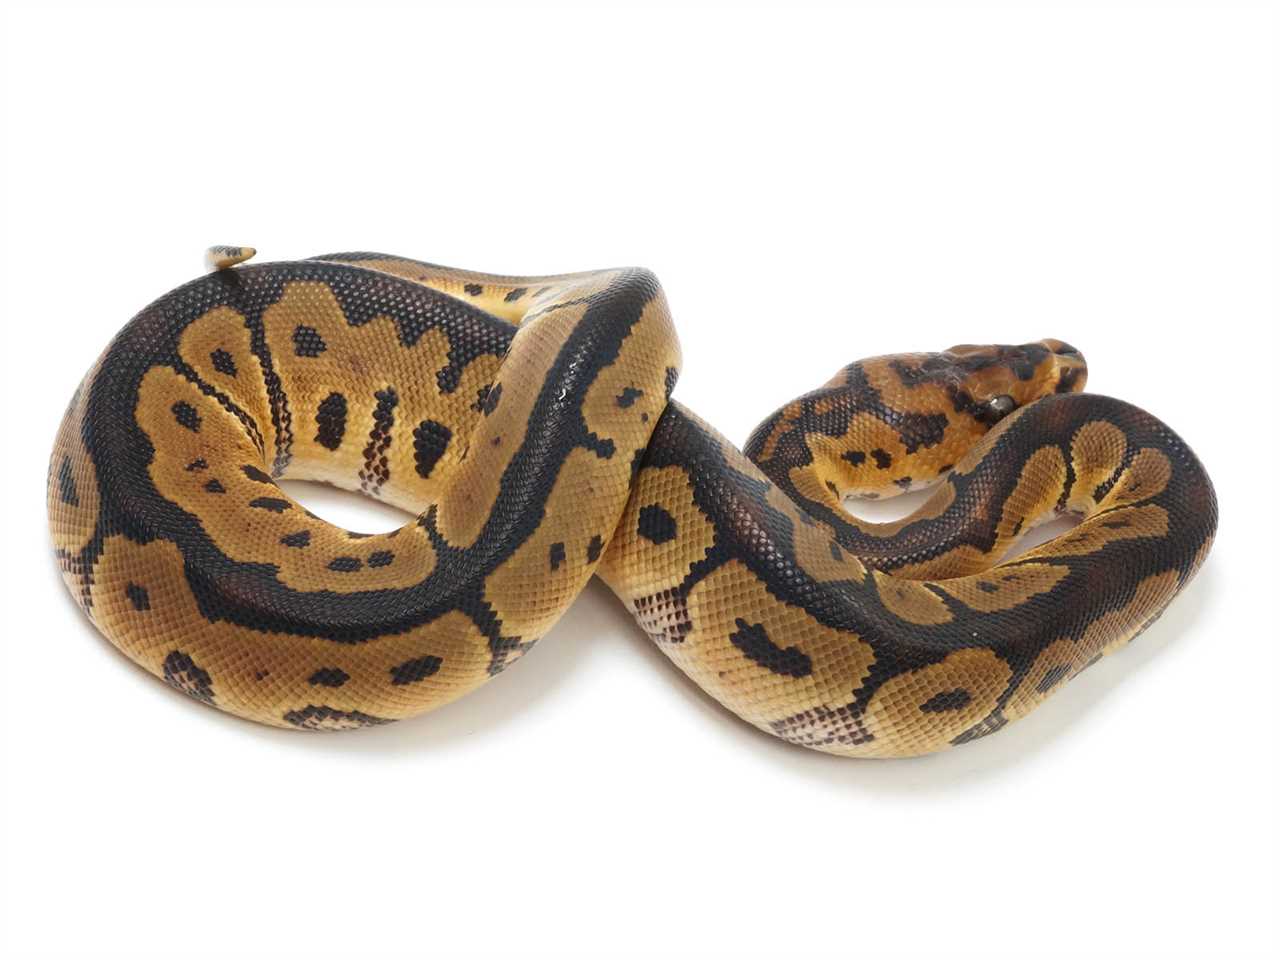 Why Clown Ball Pythons are Unique